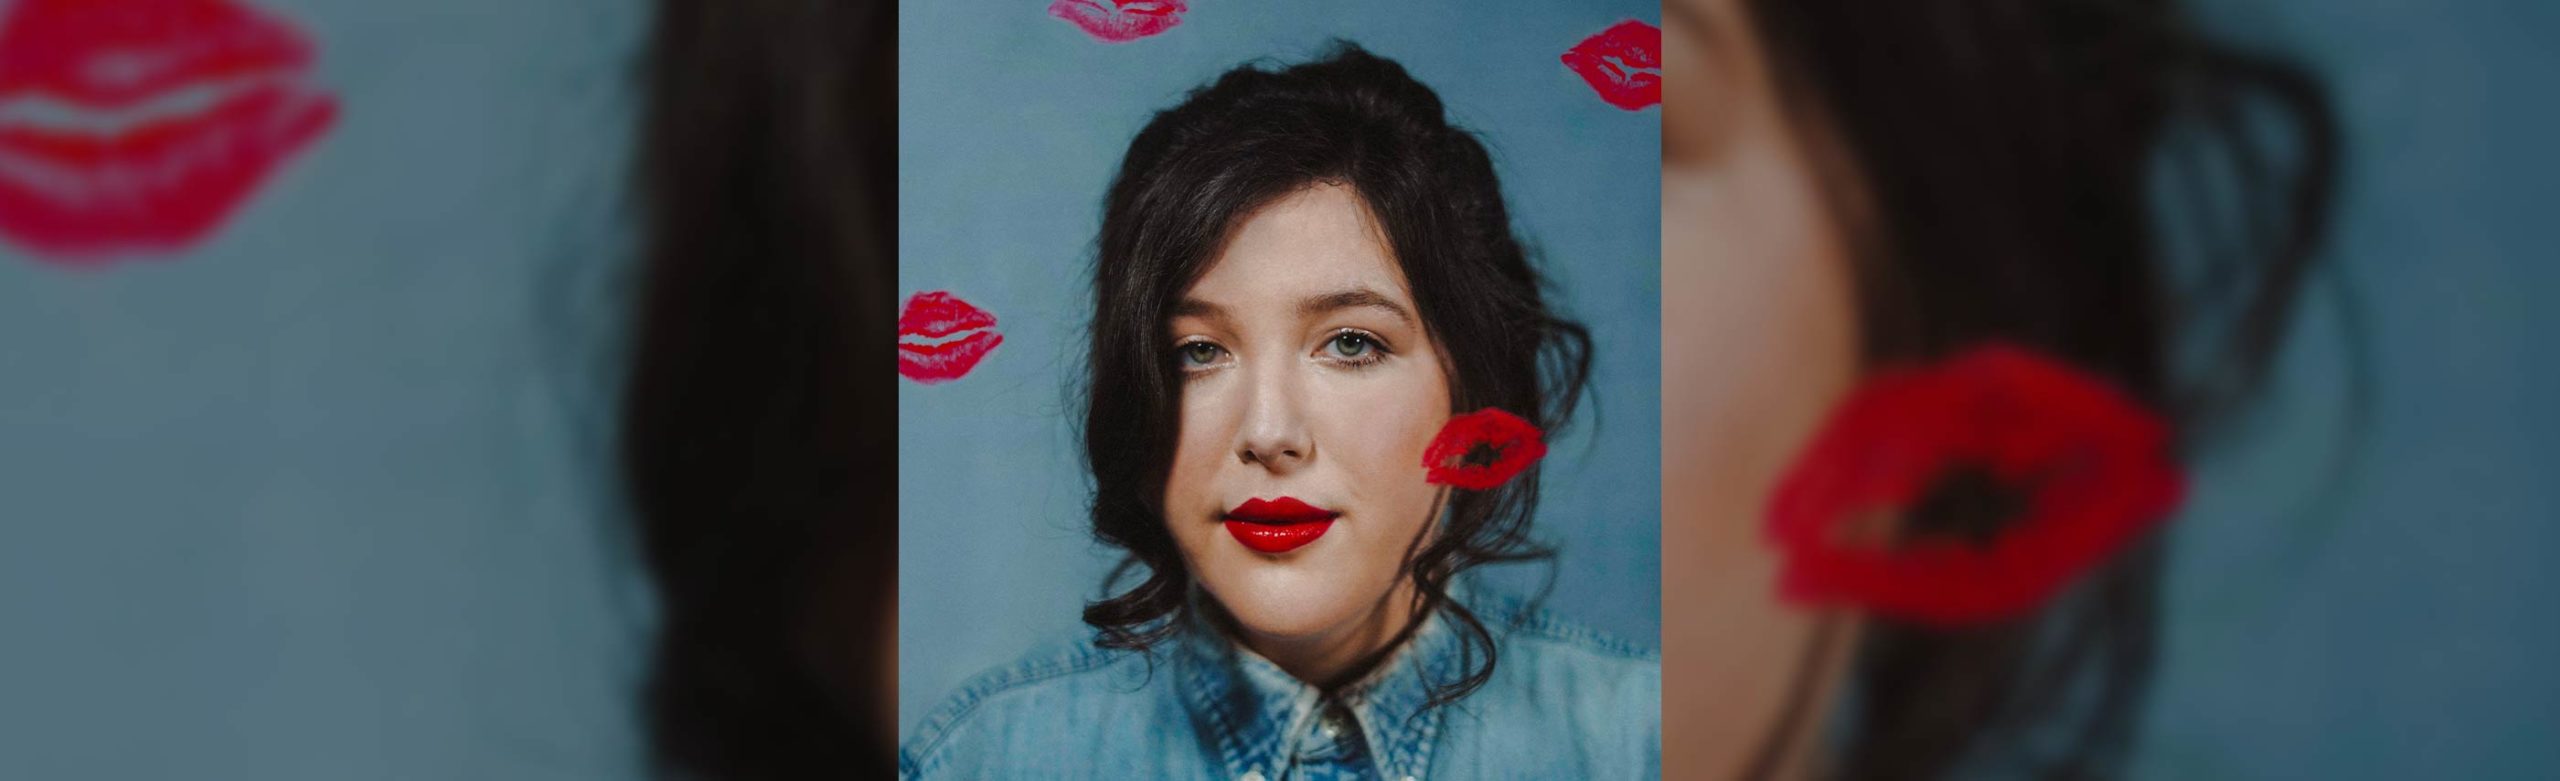 Event Info: Lucy Dacus at The ELM 2022 Image